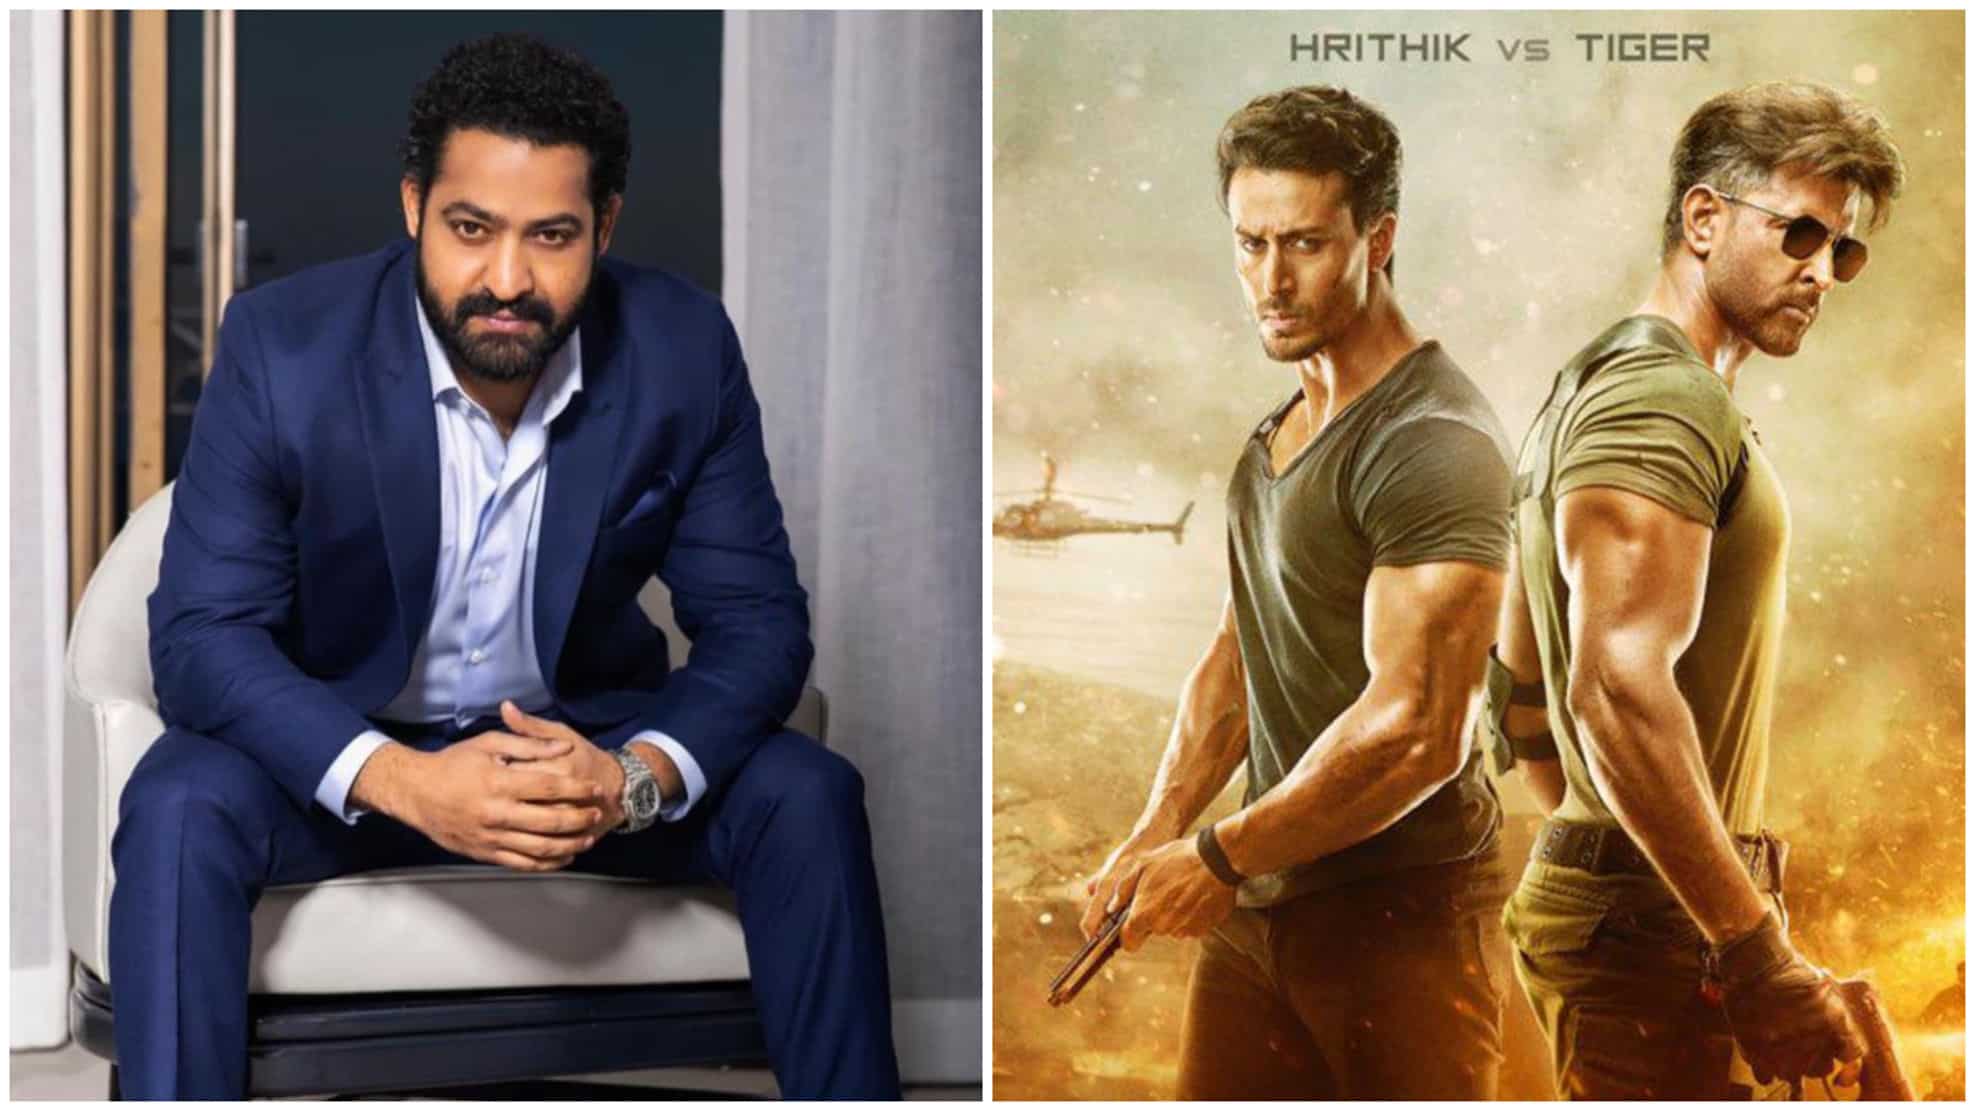 https://www.mobilemasala.com/movies/War-2-Jr-NTRs-role-in-the-film-revealed-know-more-about-Aditya-Chopras-plans-for-YRF-Spy-Universe-i220935